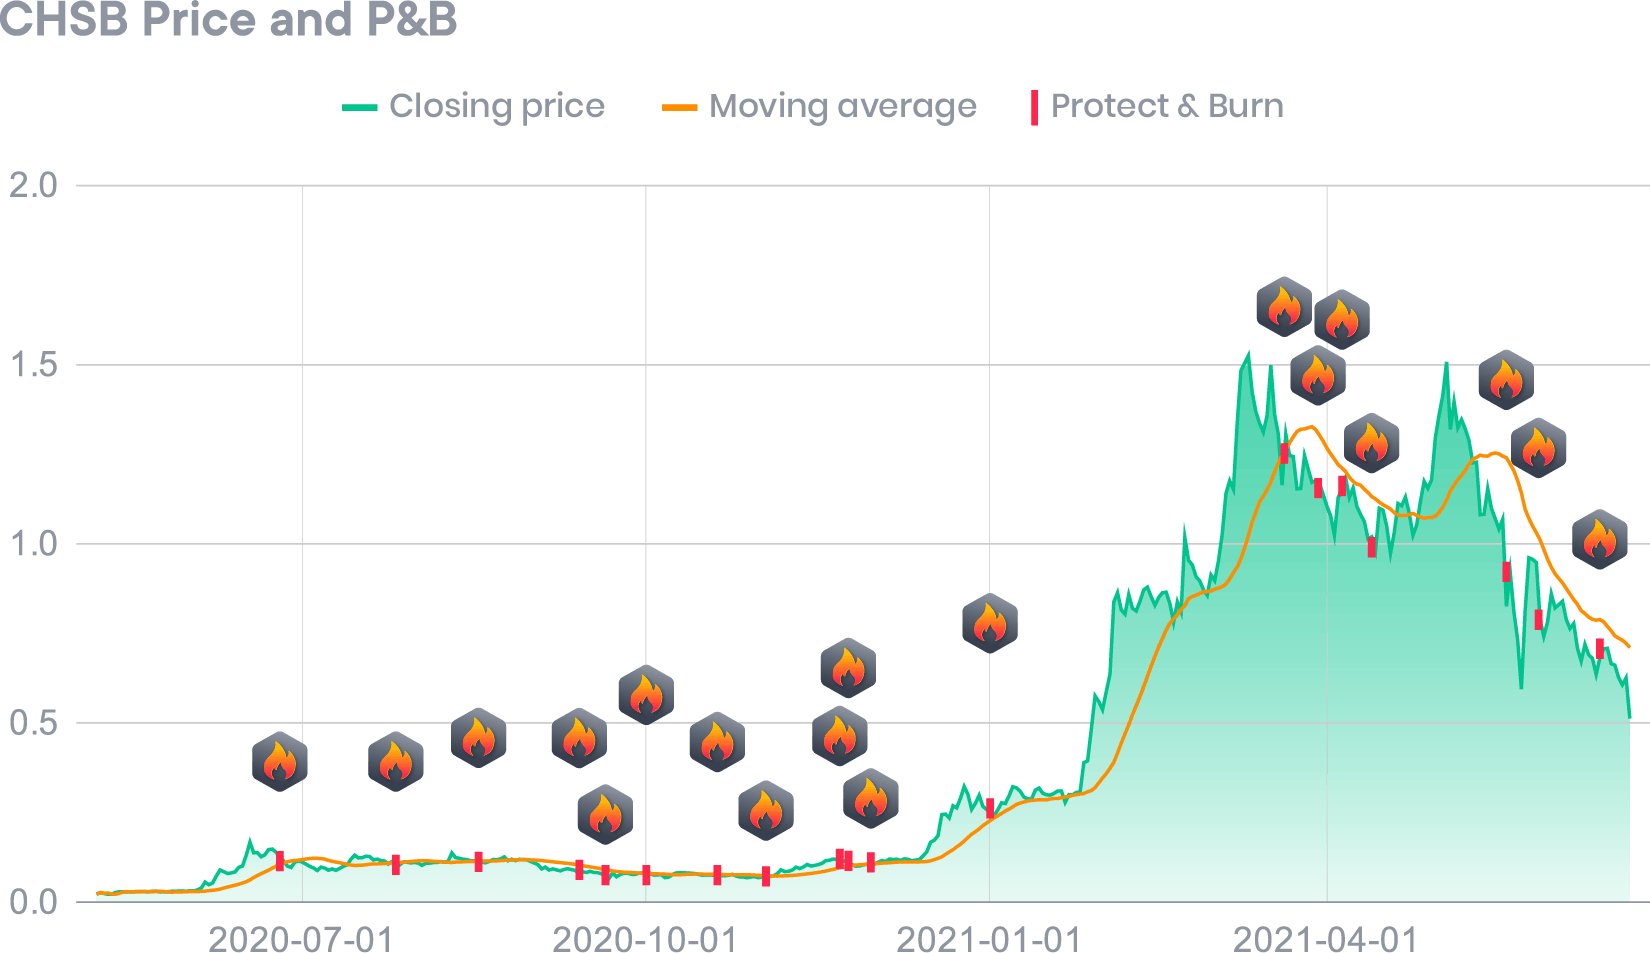 Protect & Burn and CHSB price